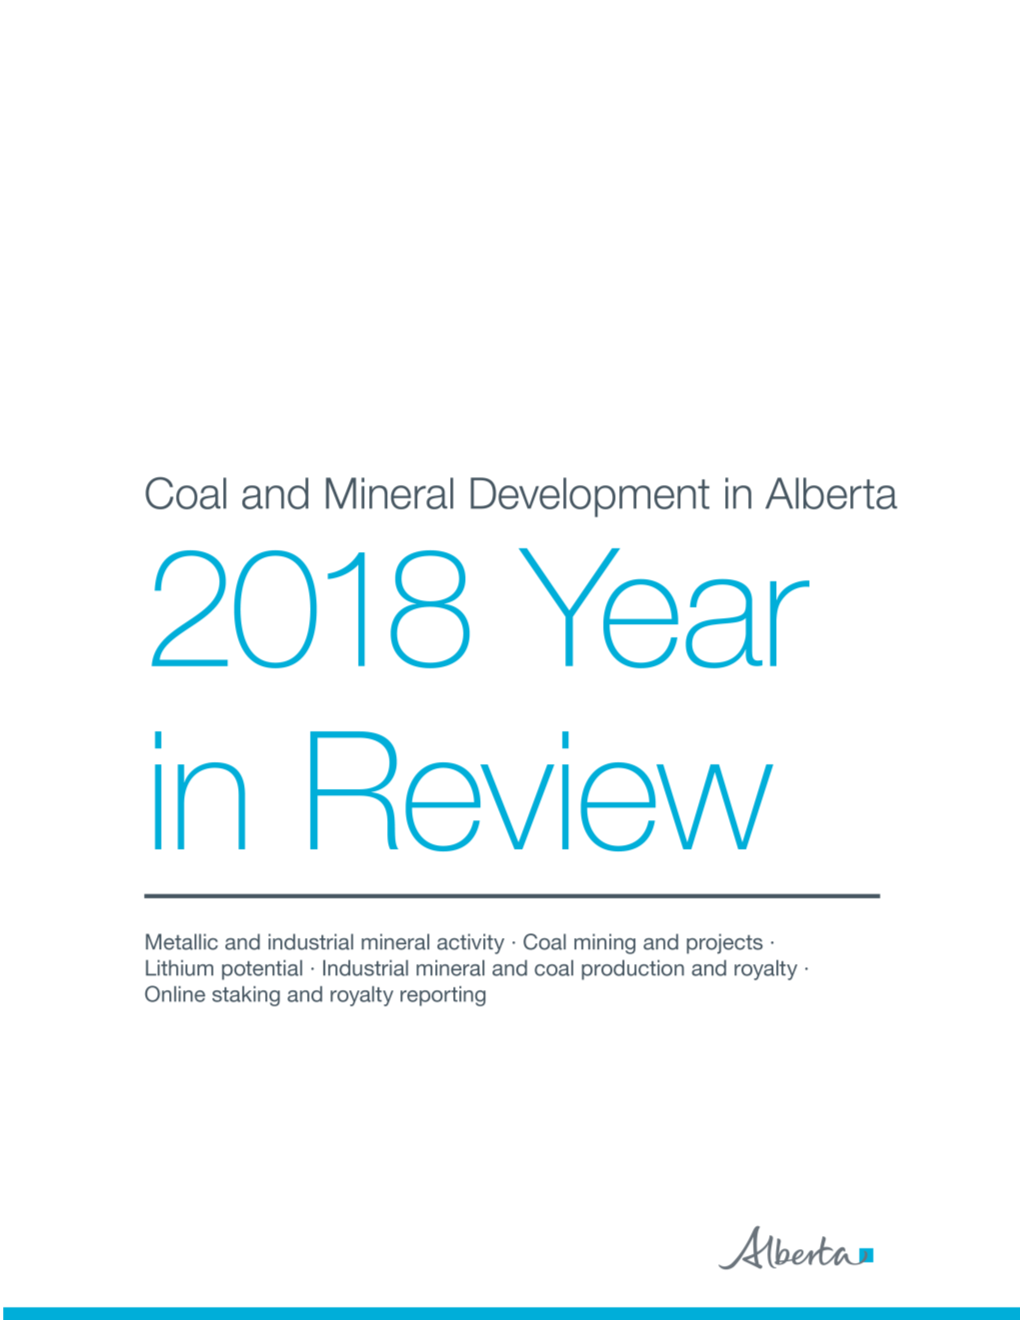 Coal and Mineral Development in Alberta 2018 Year in Review